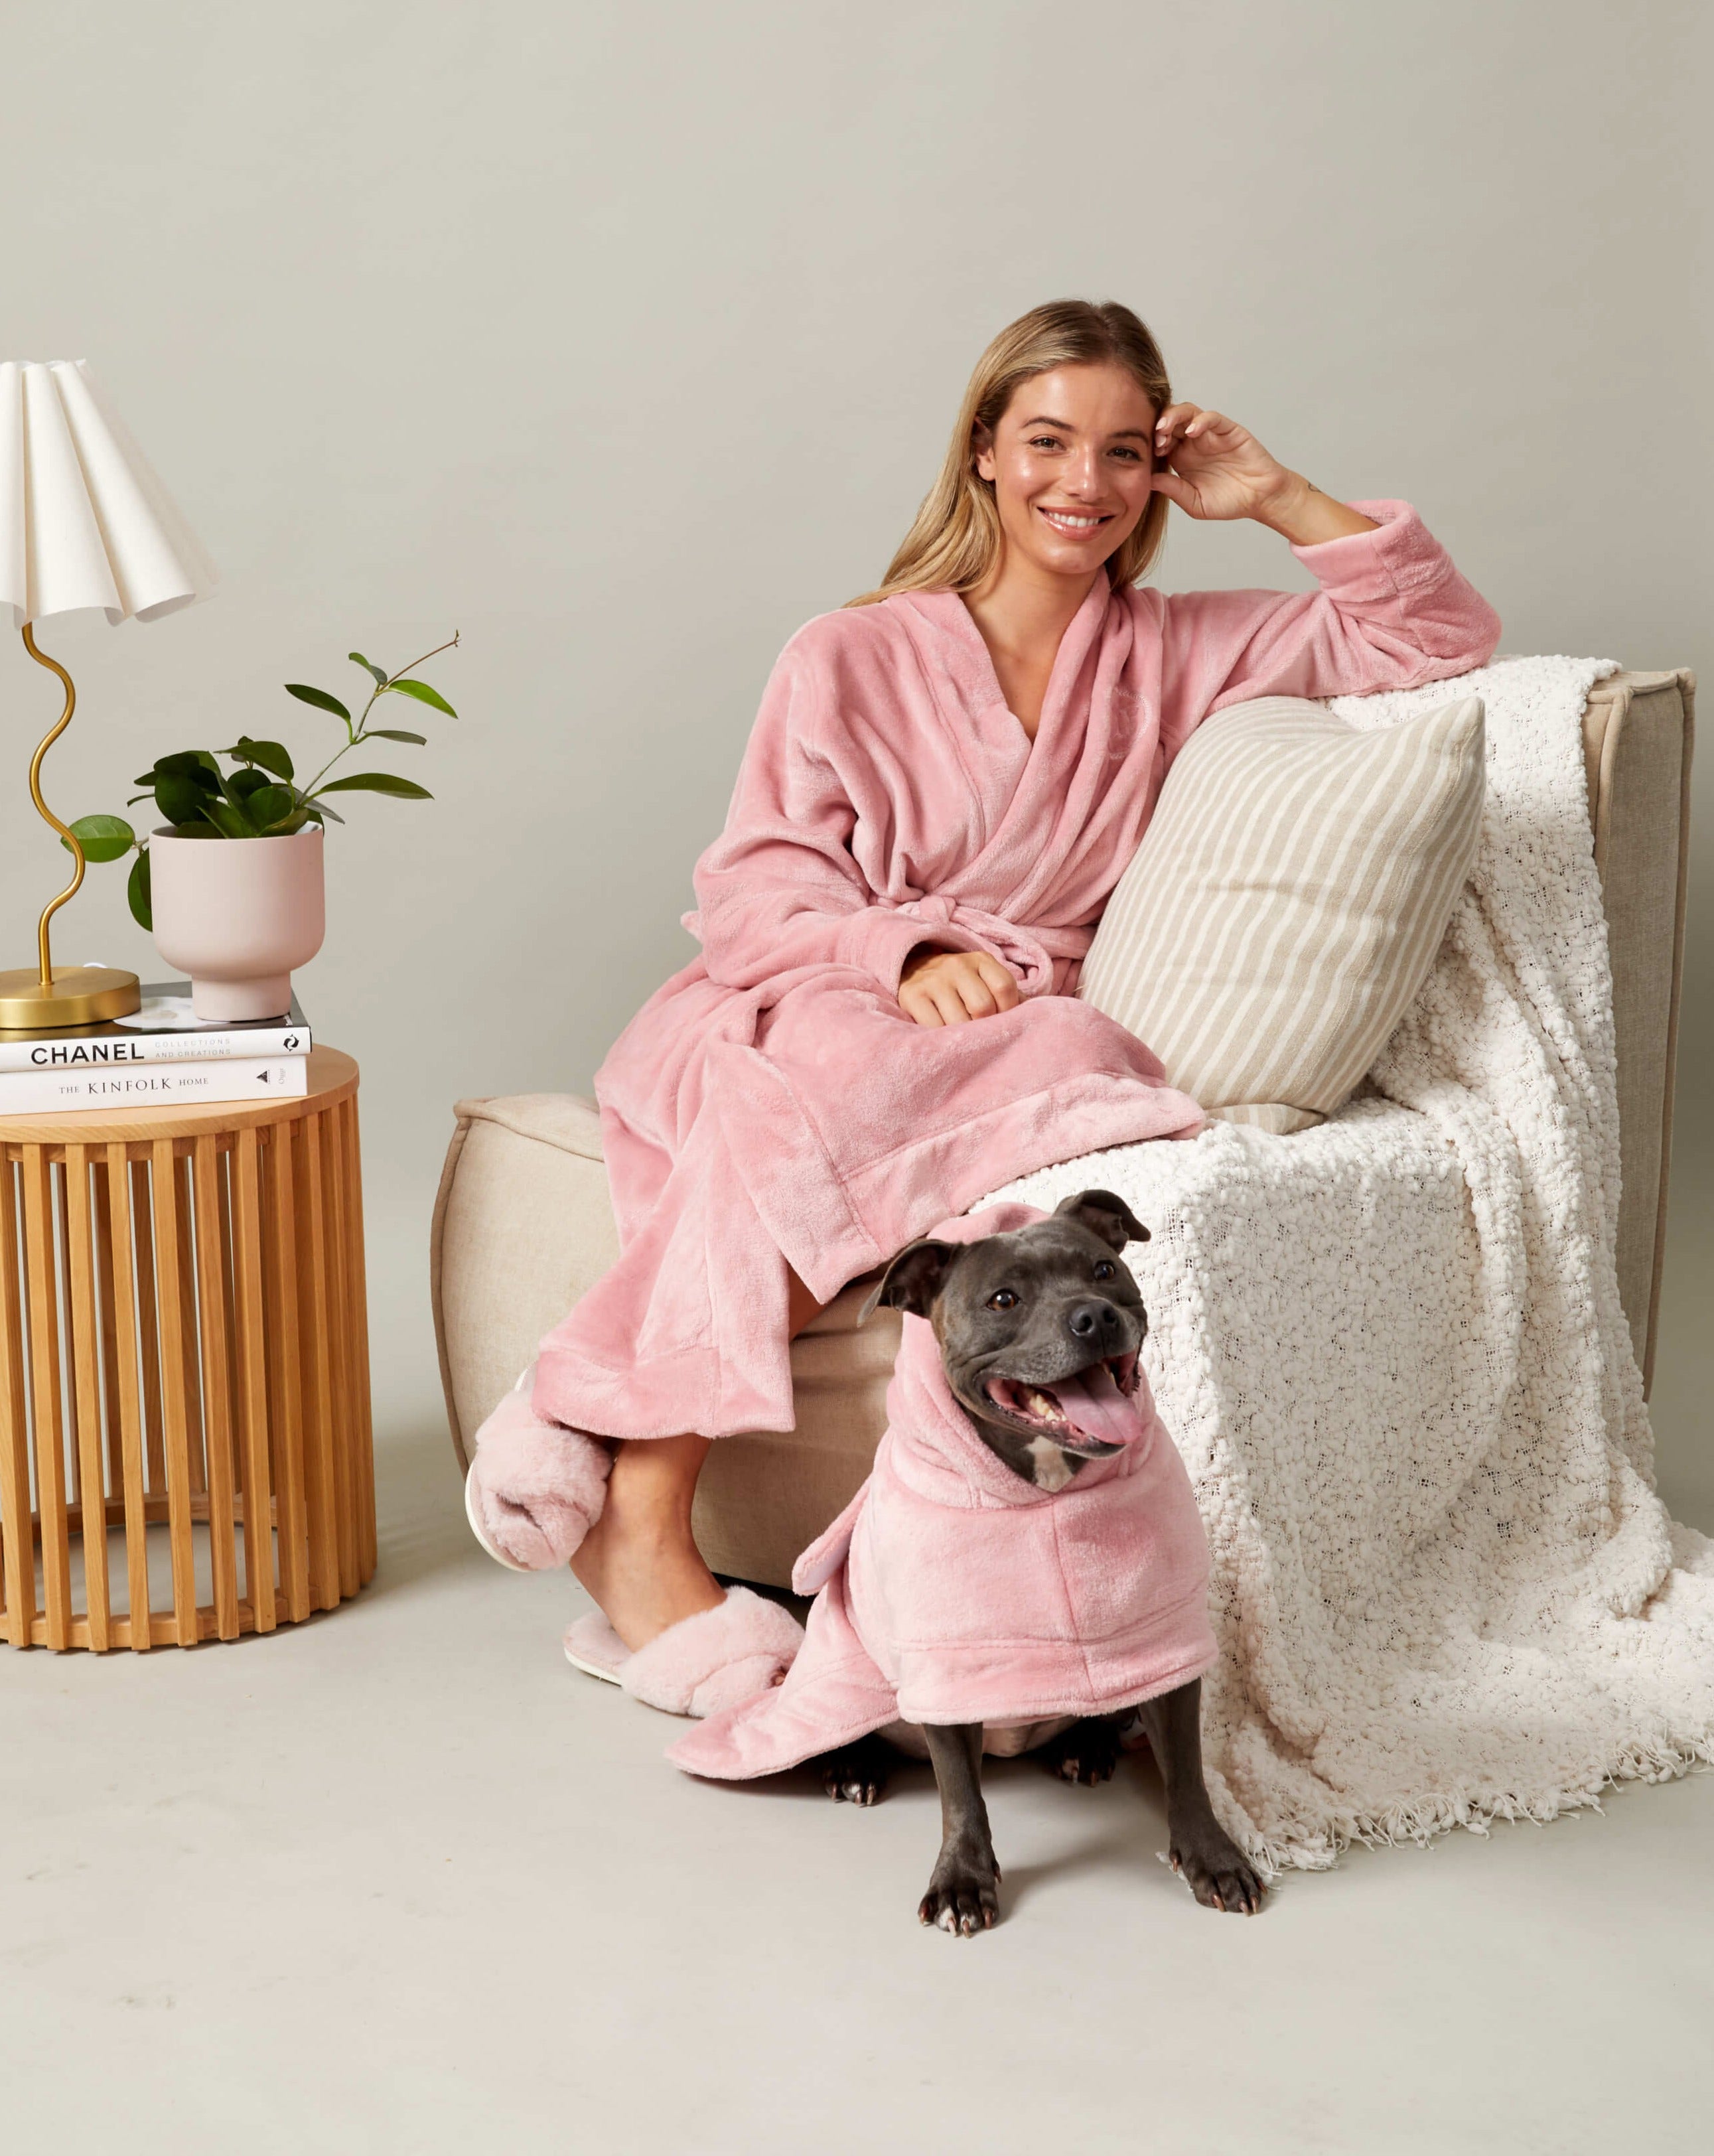 A smiling woman and her Staffy wearing matching dog and human robes in pink.